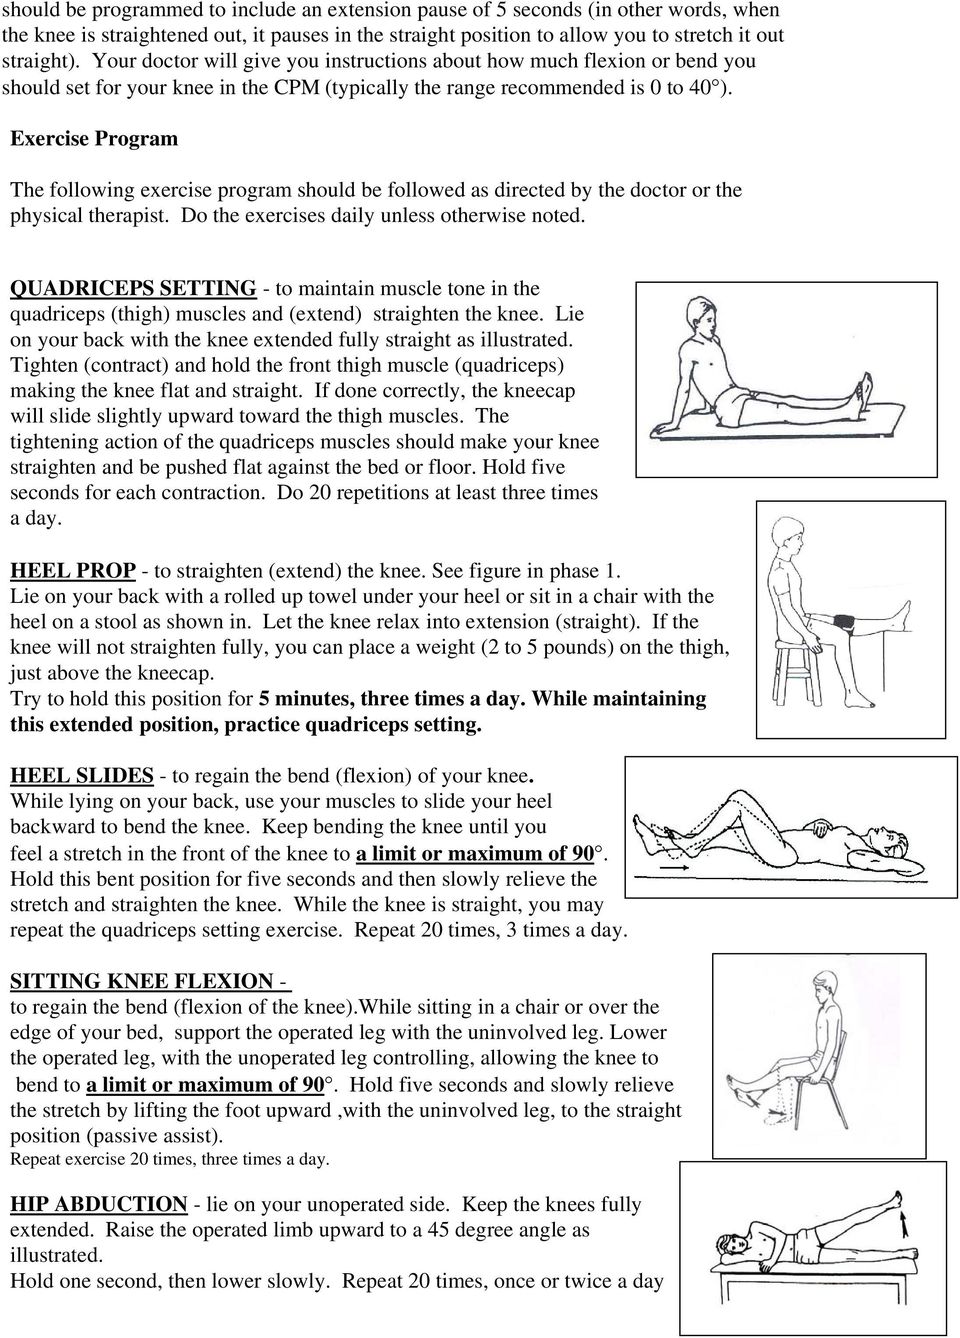 Exercise Program The following exercise program should be followed as directed by the doctor or the physical therapist. Do the exercises daily unless otherwise noted.